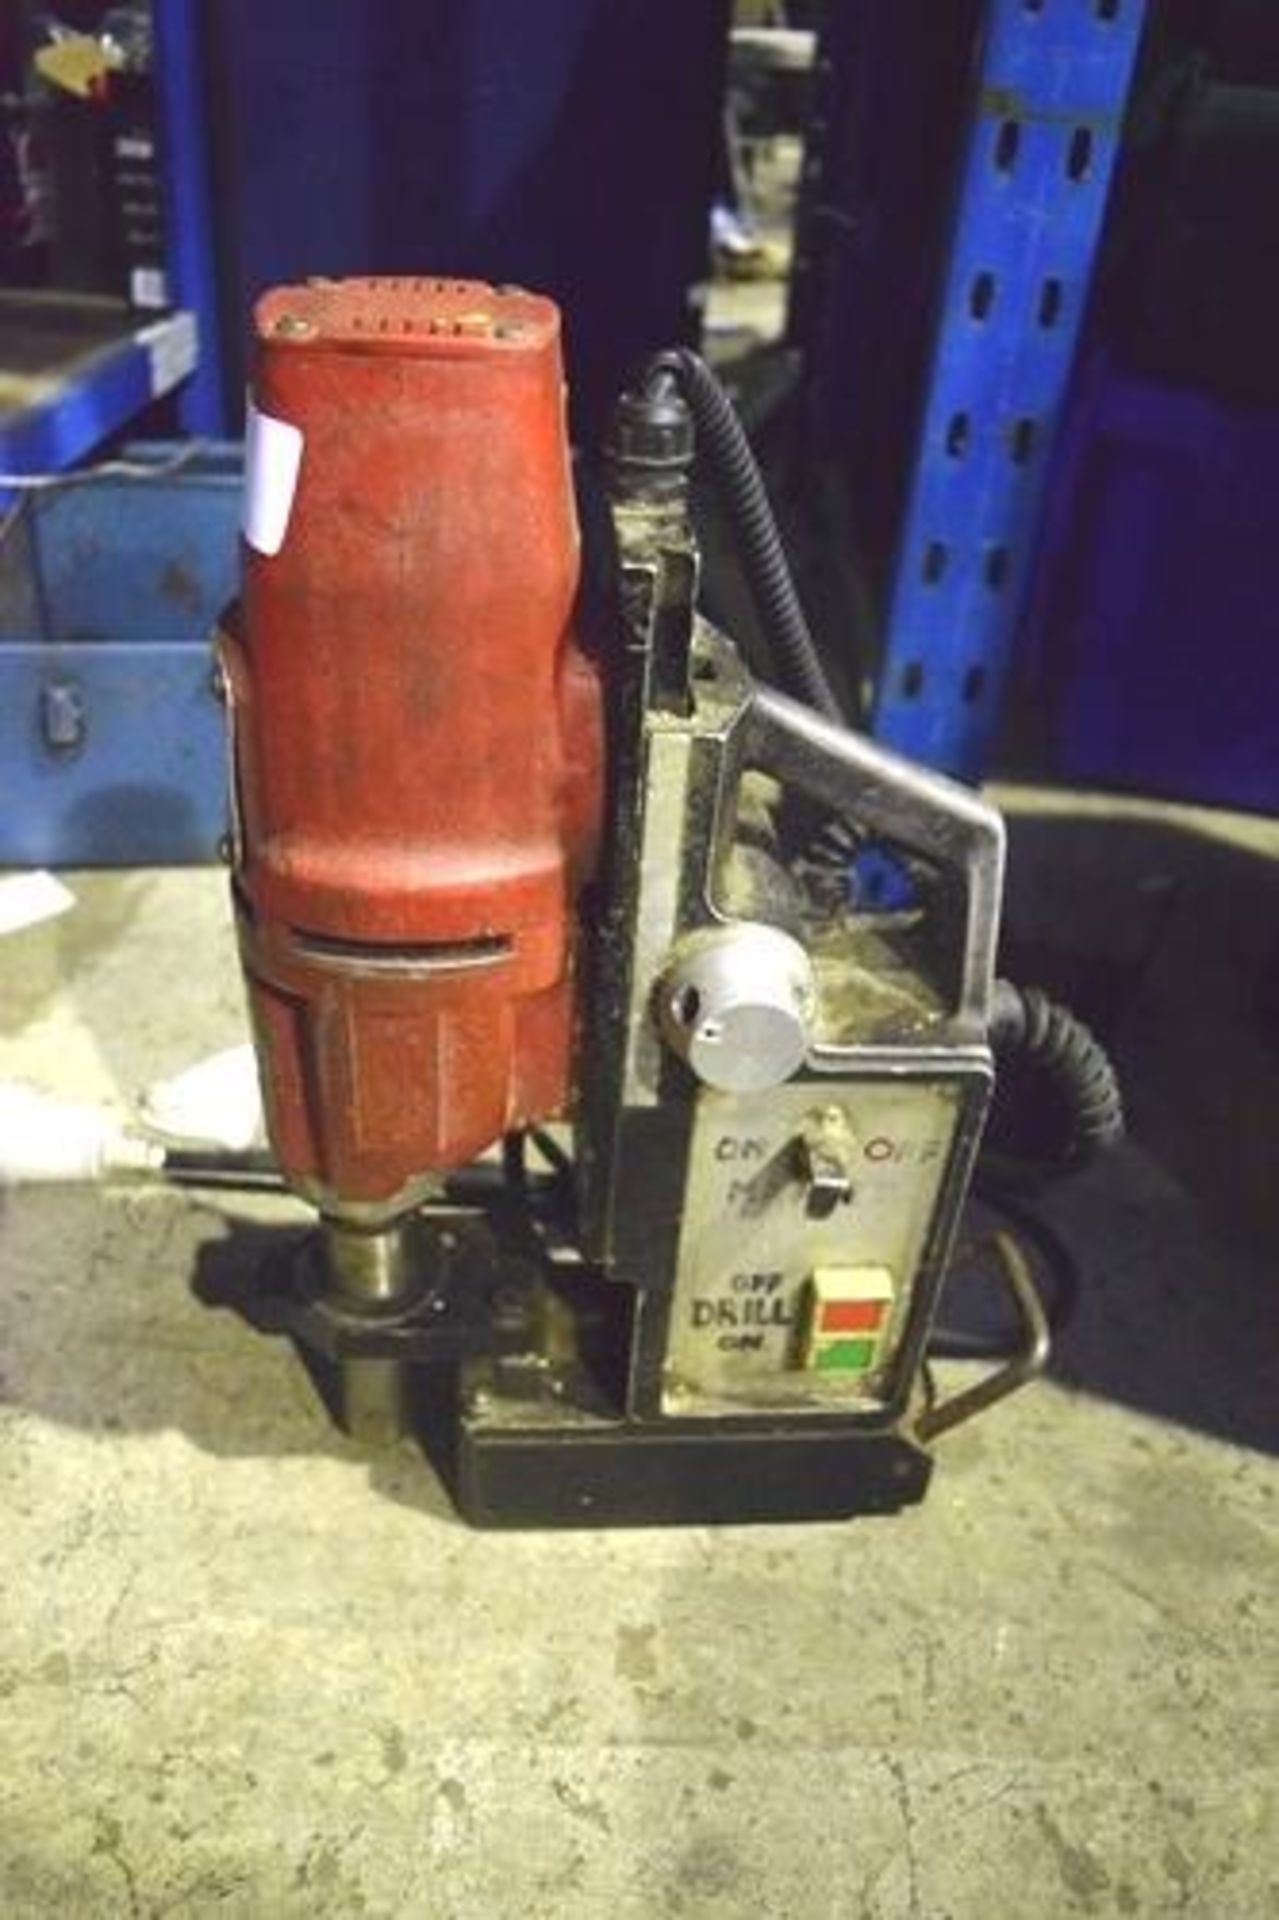 Rotabroach 110V magnetic drill stand, S.N. 15824 - Second-hand (GS16) - Image 2 of 3